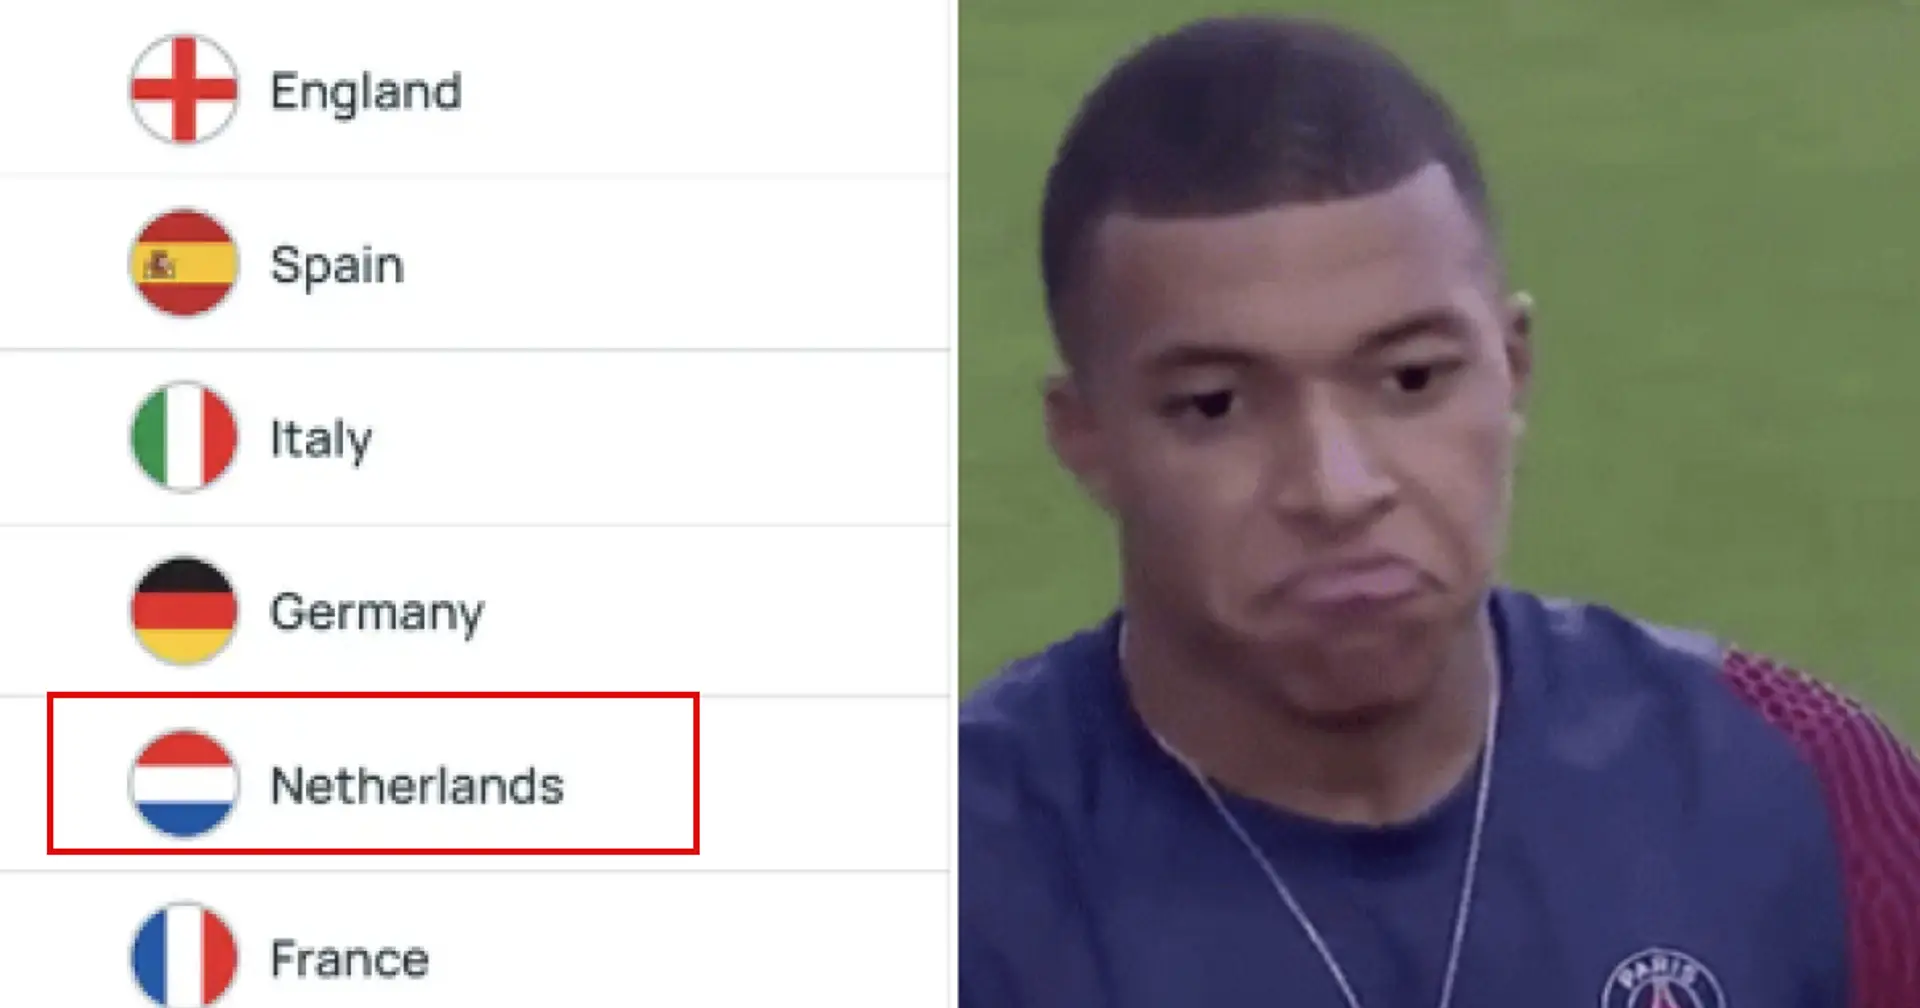 Does he know? Latest numbers suggest Mbappe screwed up by not joining Real Madrid